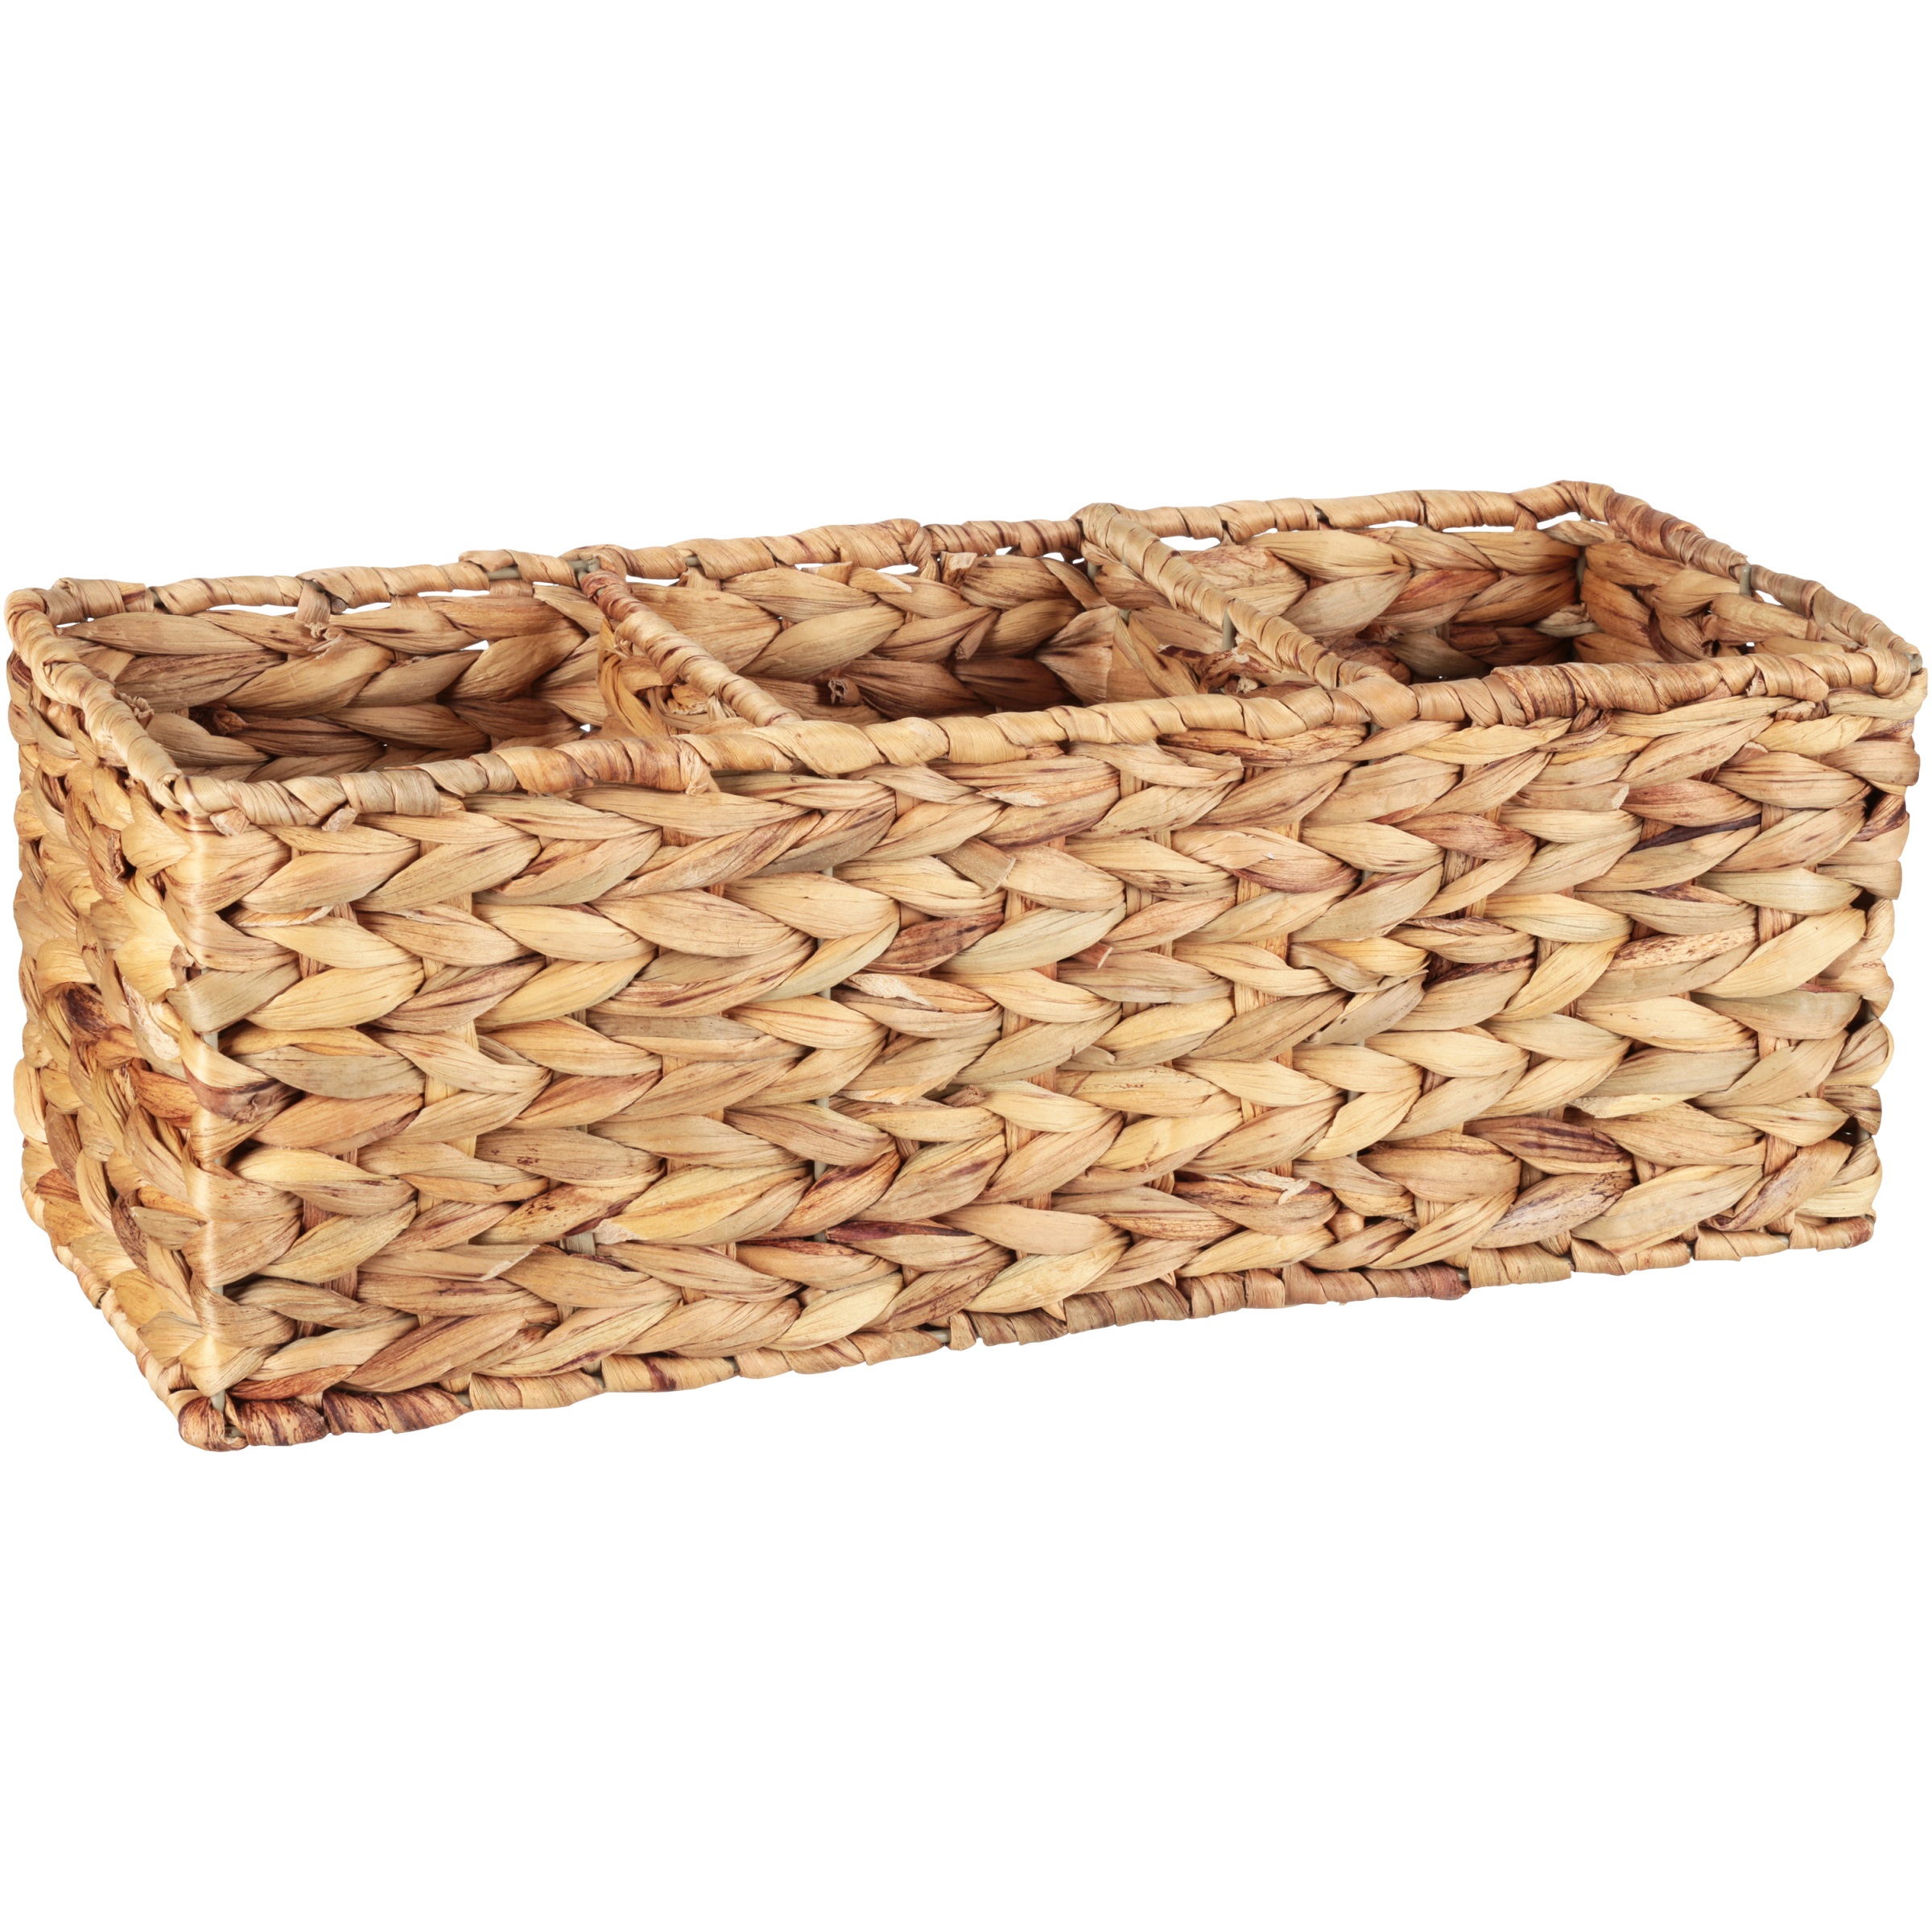 Better Homes & Gardens Woven Water Hyacinth Tank Basket, Natural - image 1 of 6